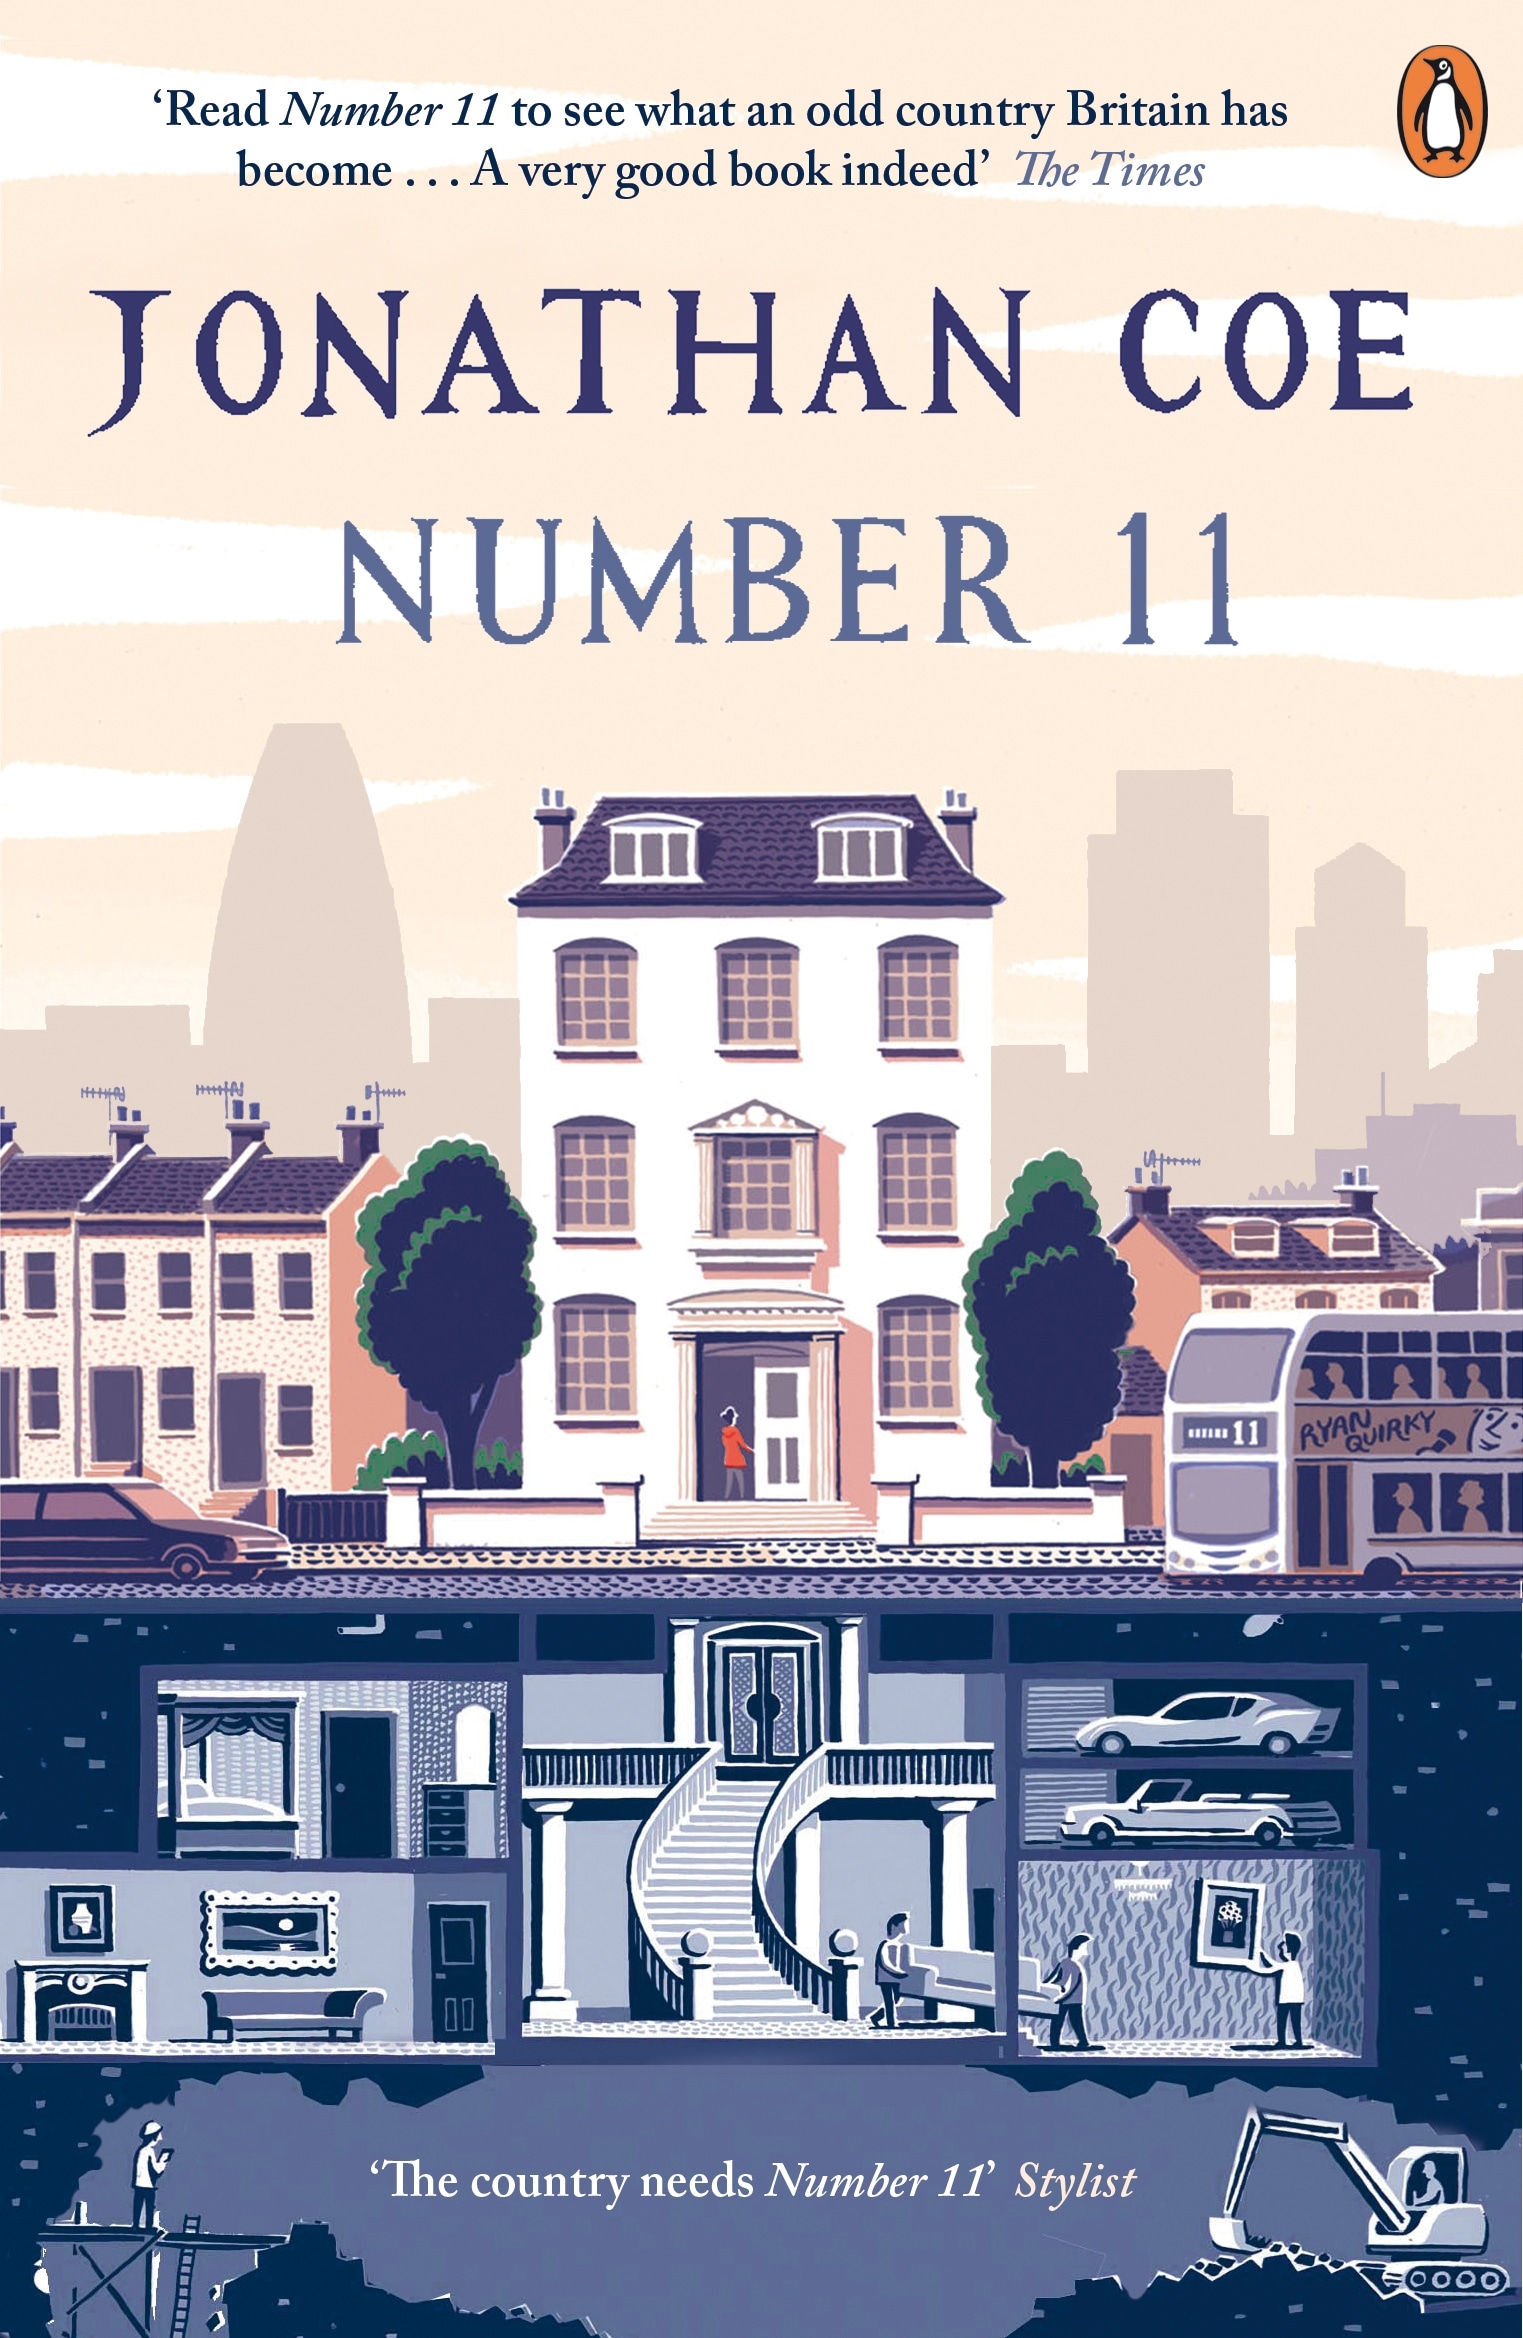 Book “Number 11” by Jonathan Coe — April 7, 2016